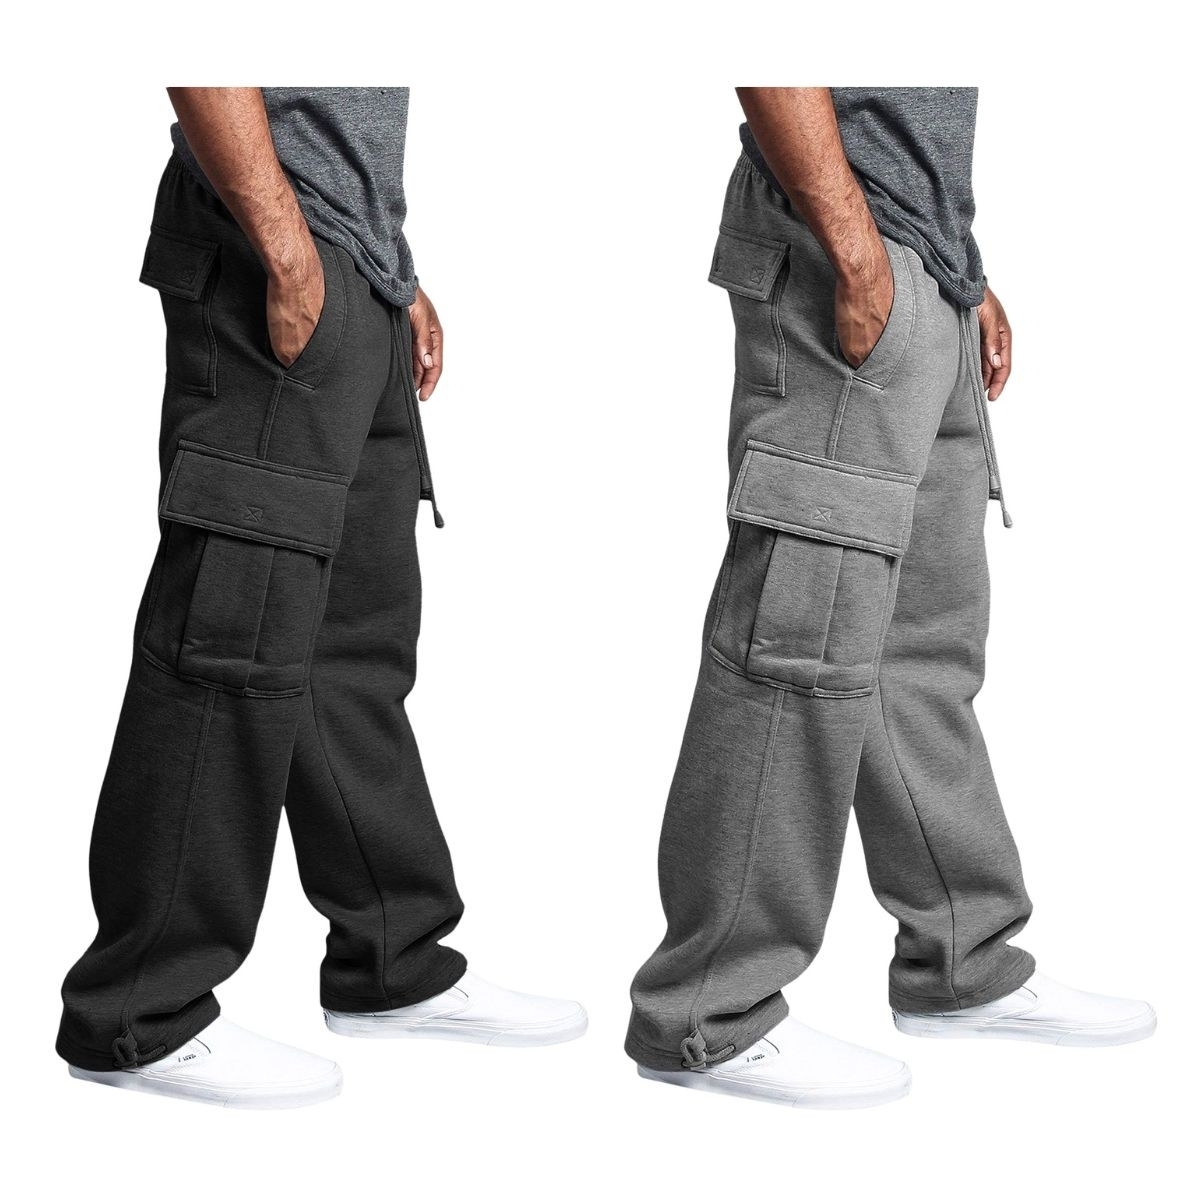 2-Pack: Men's Casual Solid Fleece Lined Cargo Jogger Soft Sweatpants With Pockets - Black&grey, Medium